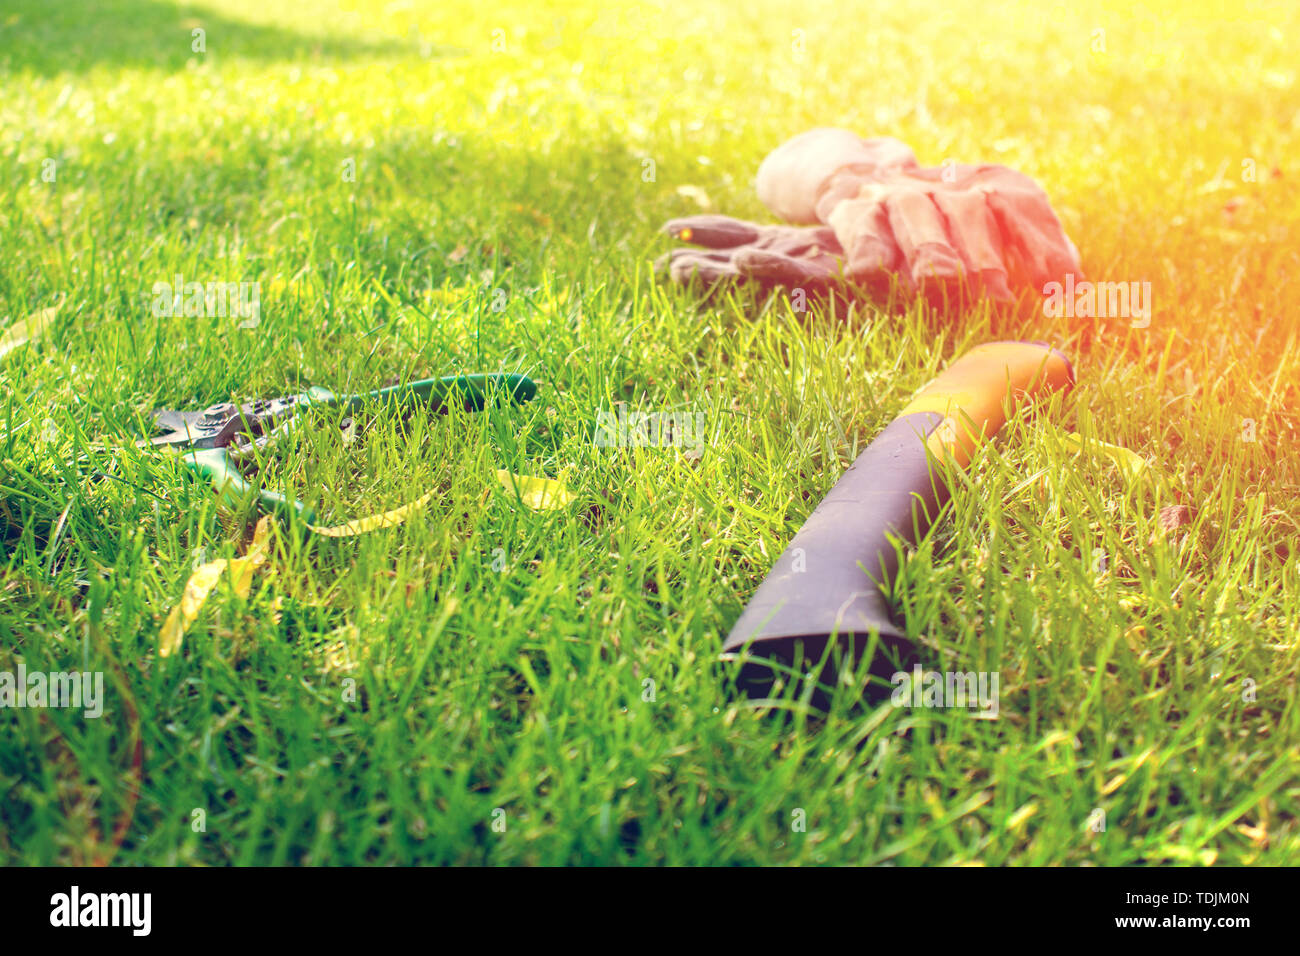 protective gloves, hand saw and pruning shears laying on green grass during hot summer day Stock Photo